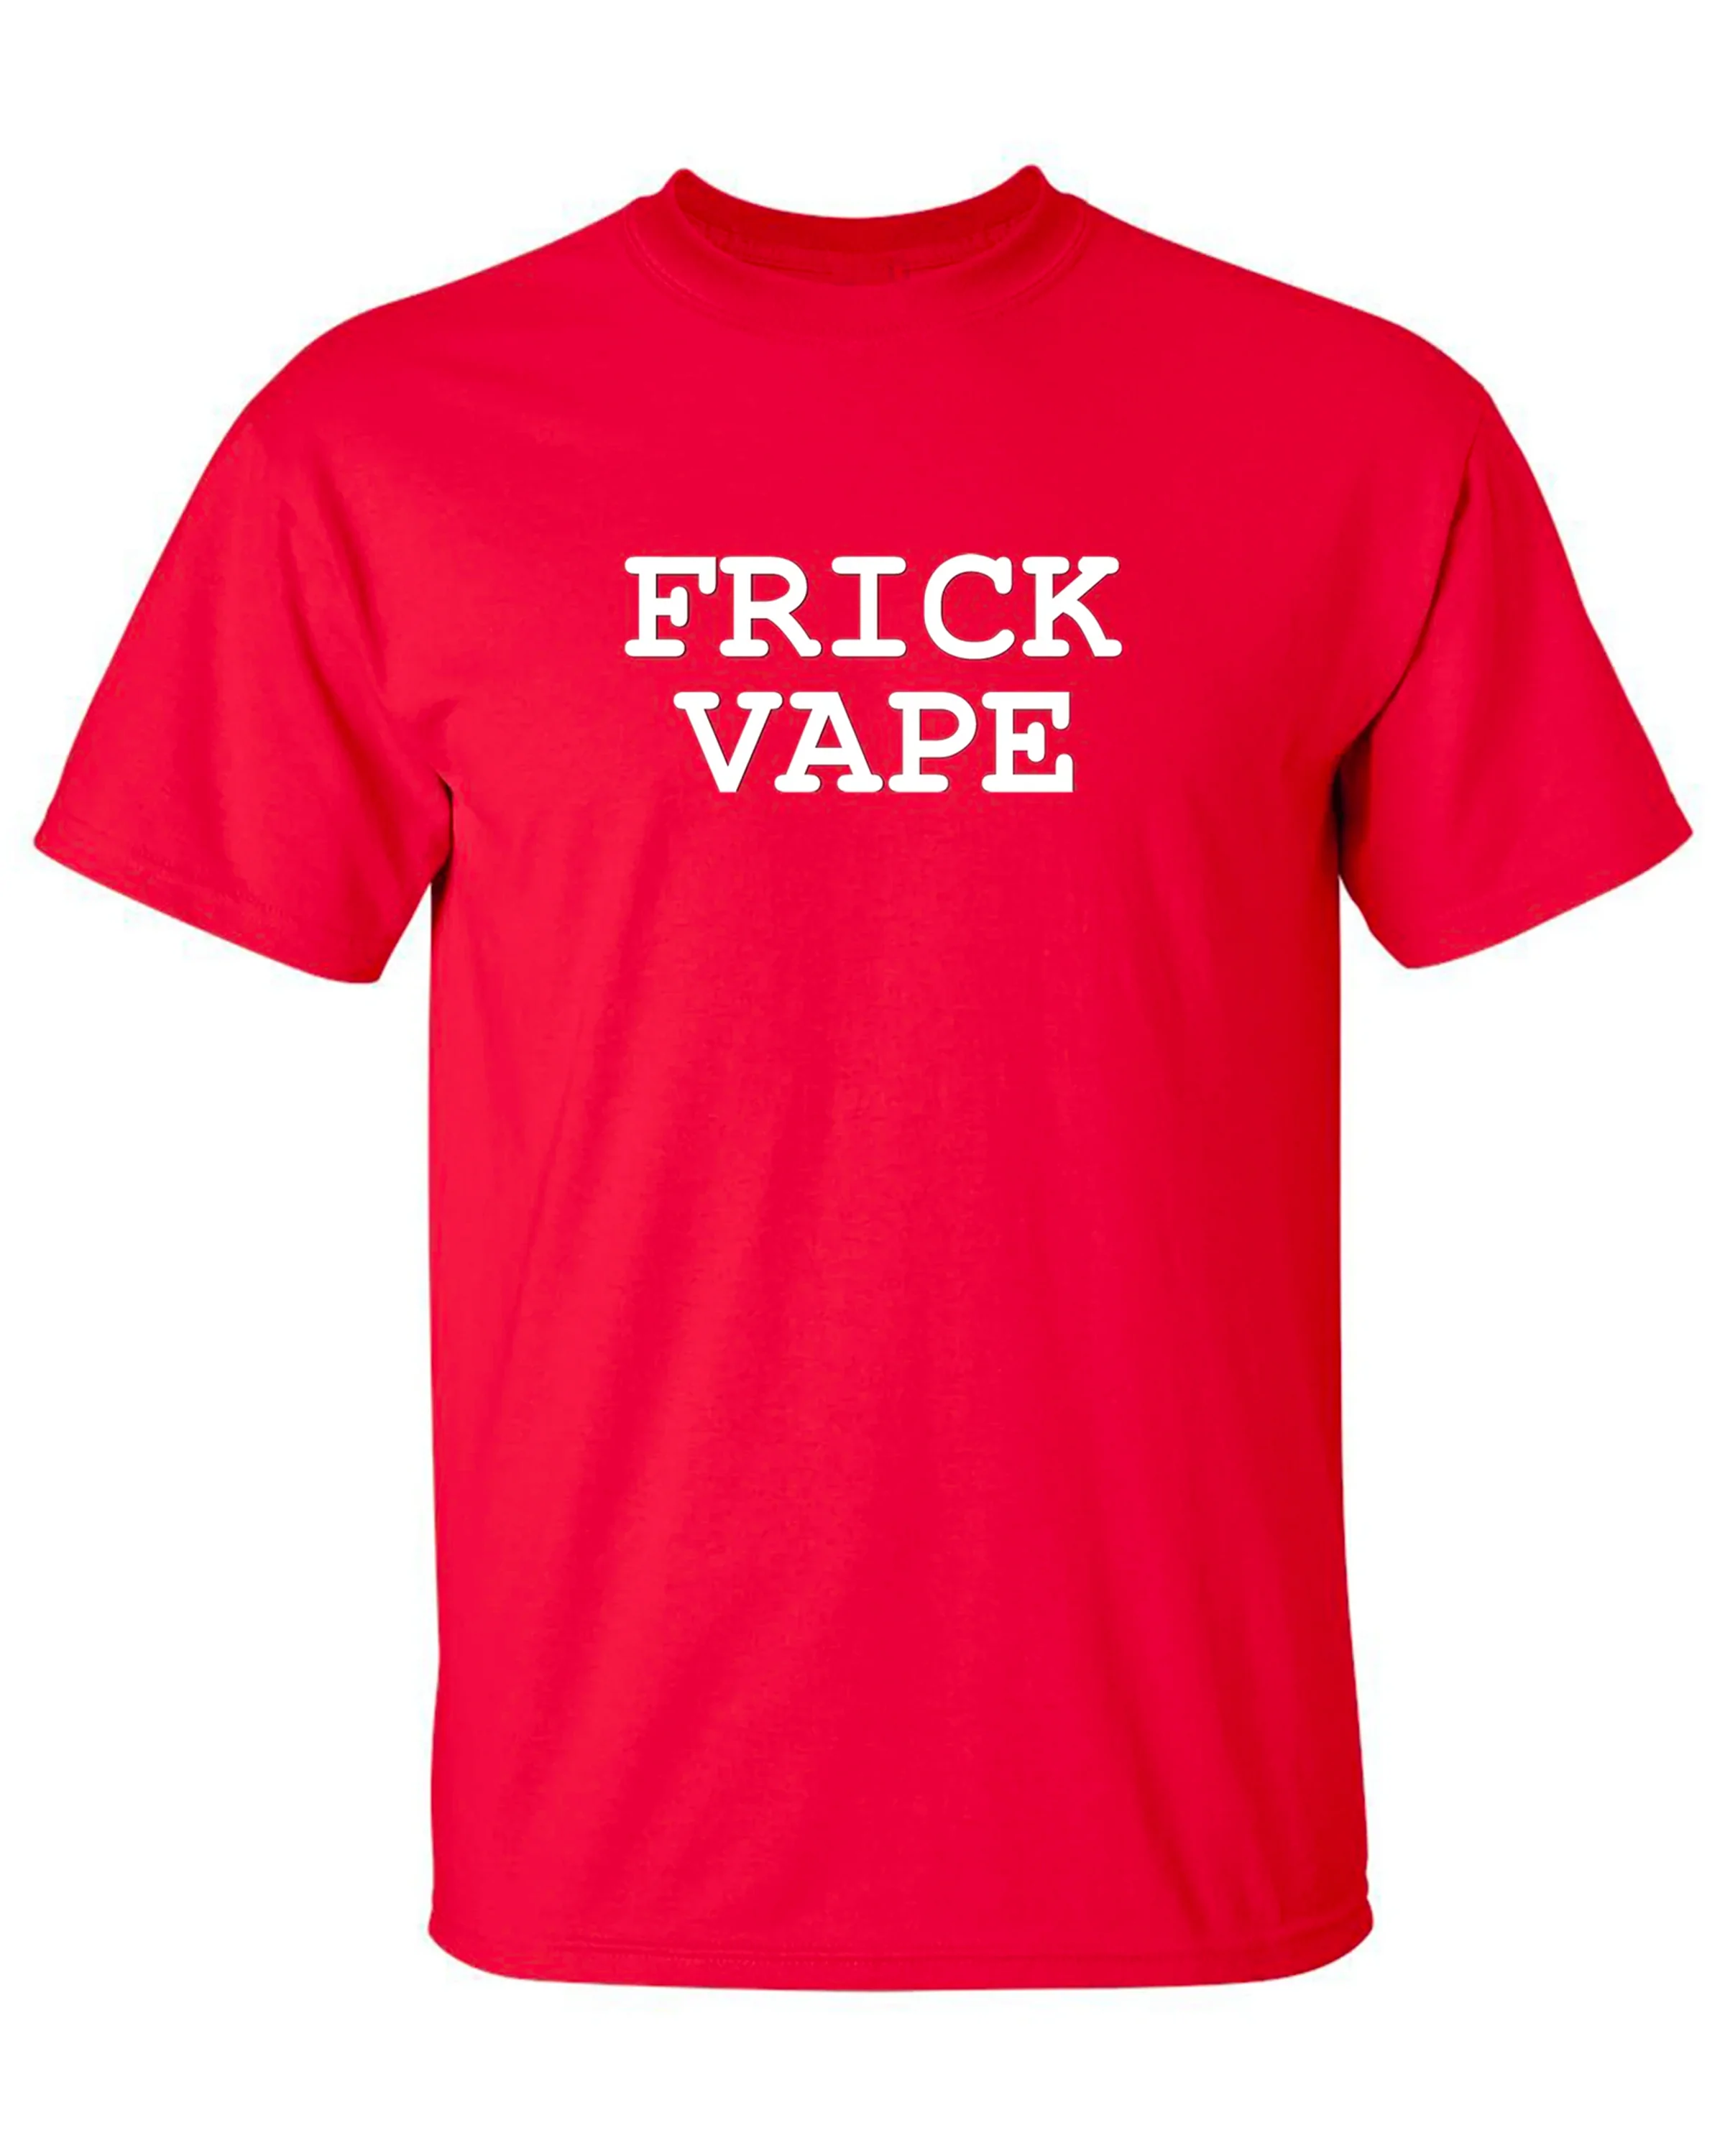 Why You Should Never, Ever Buy Frick Vape?